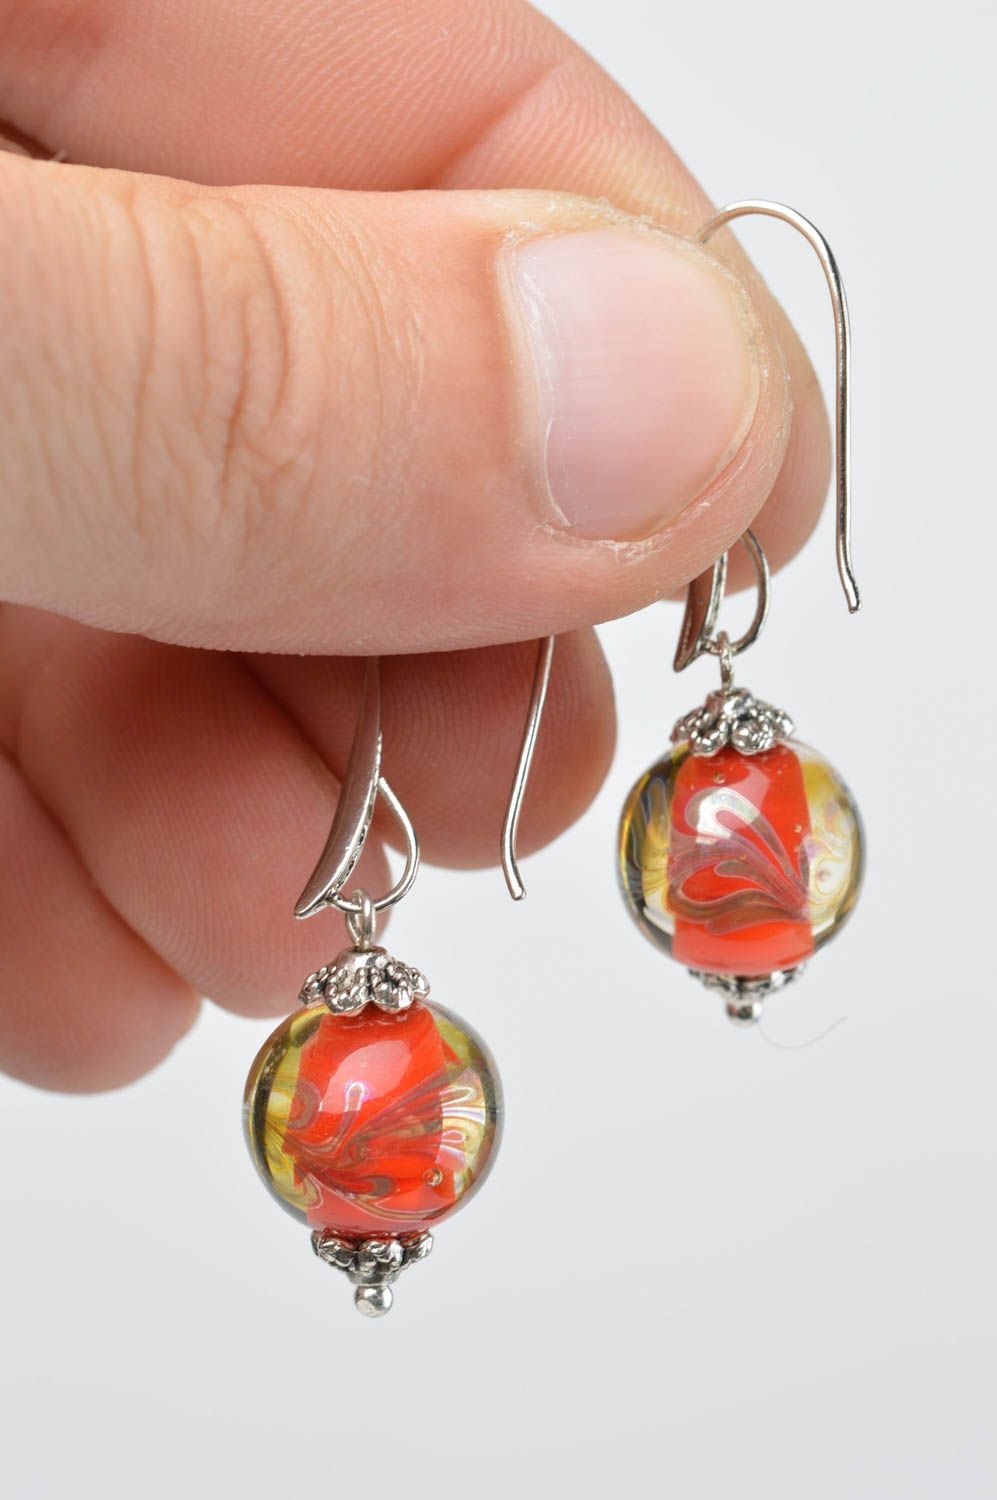 Handmade earrings with charms glass earrings lampwork accessories glass jewelry photo 5